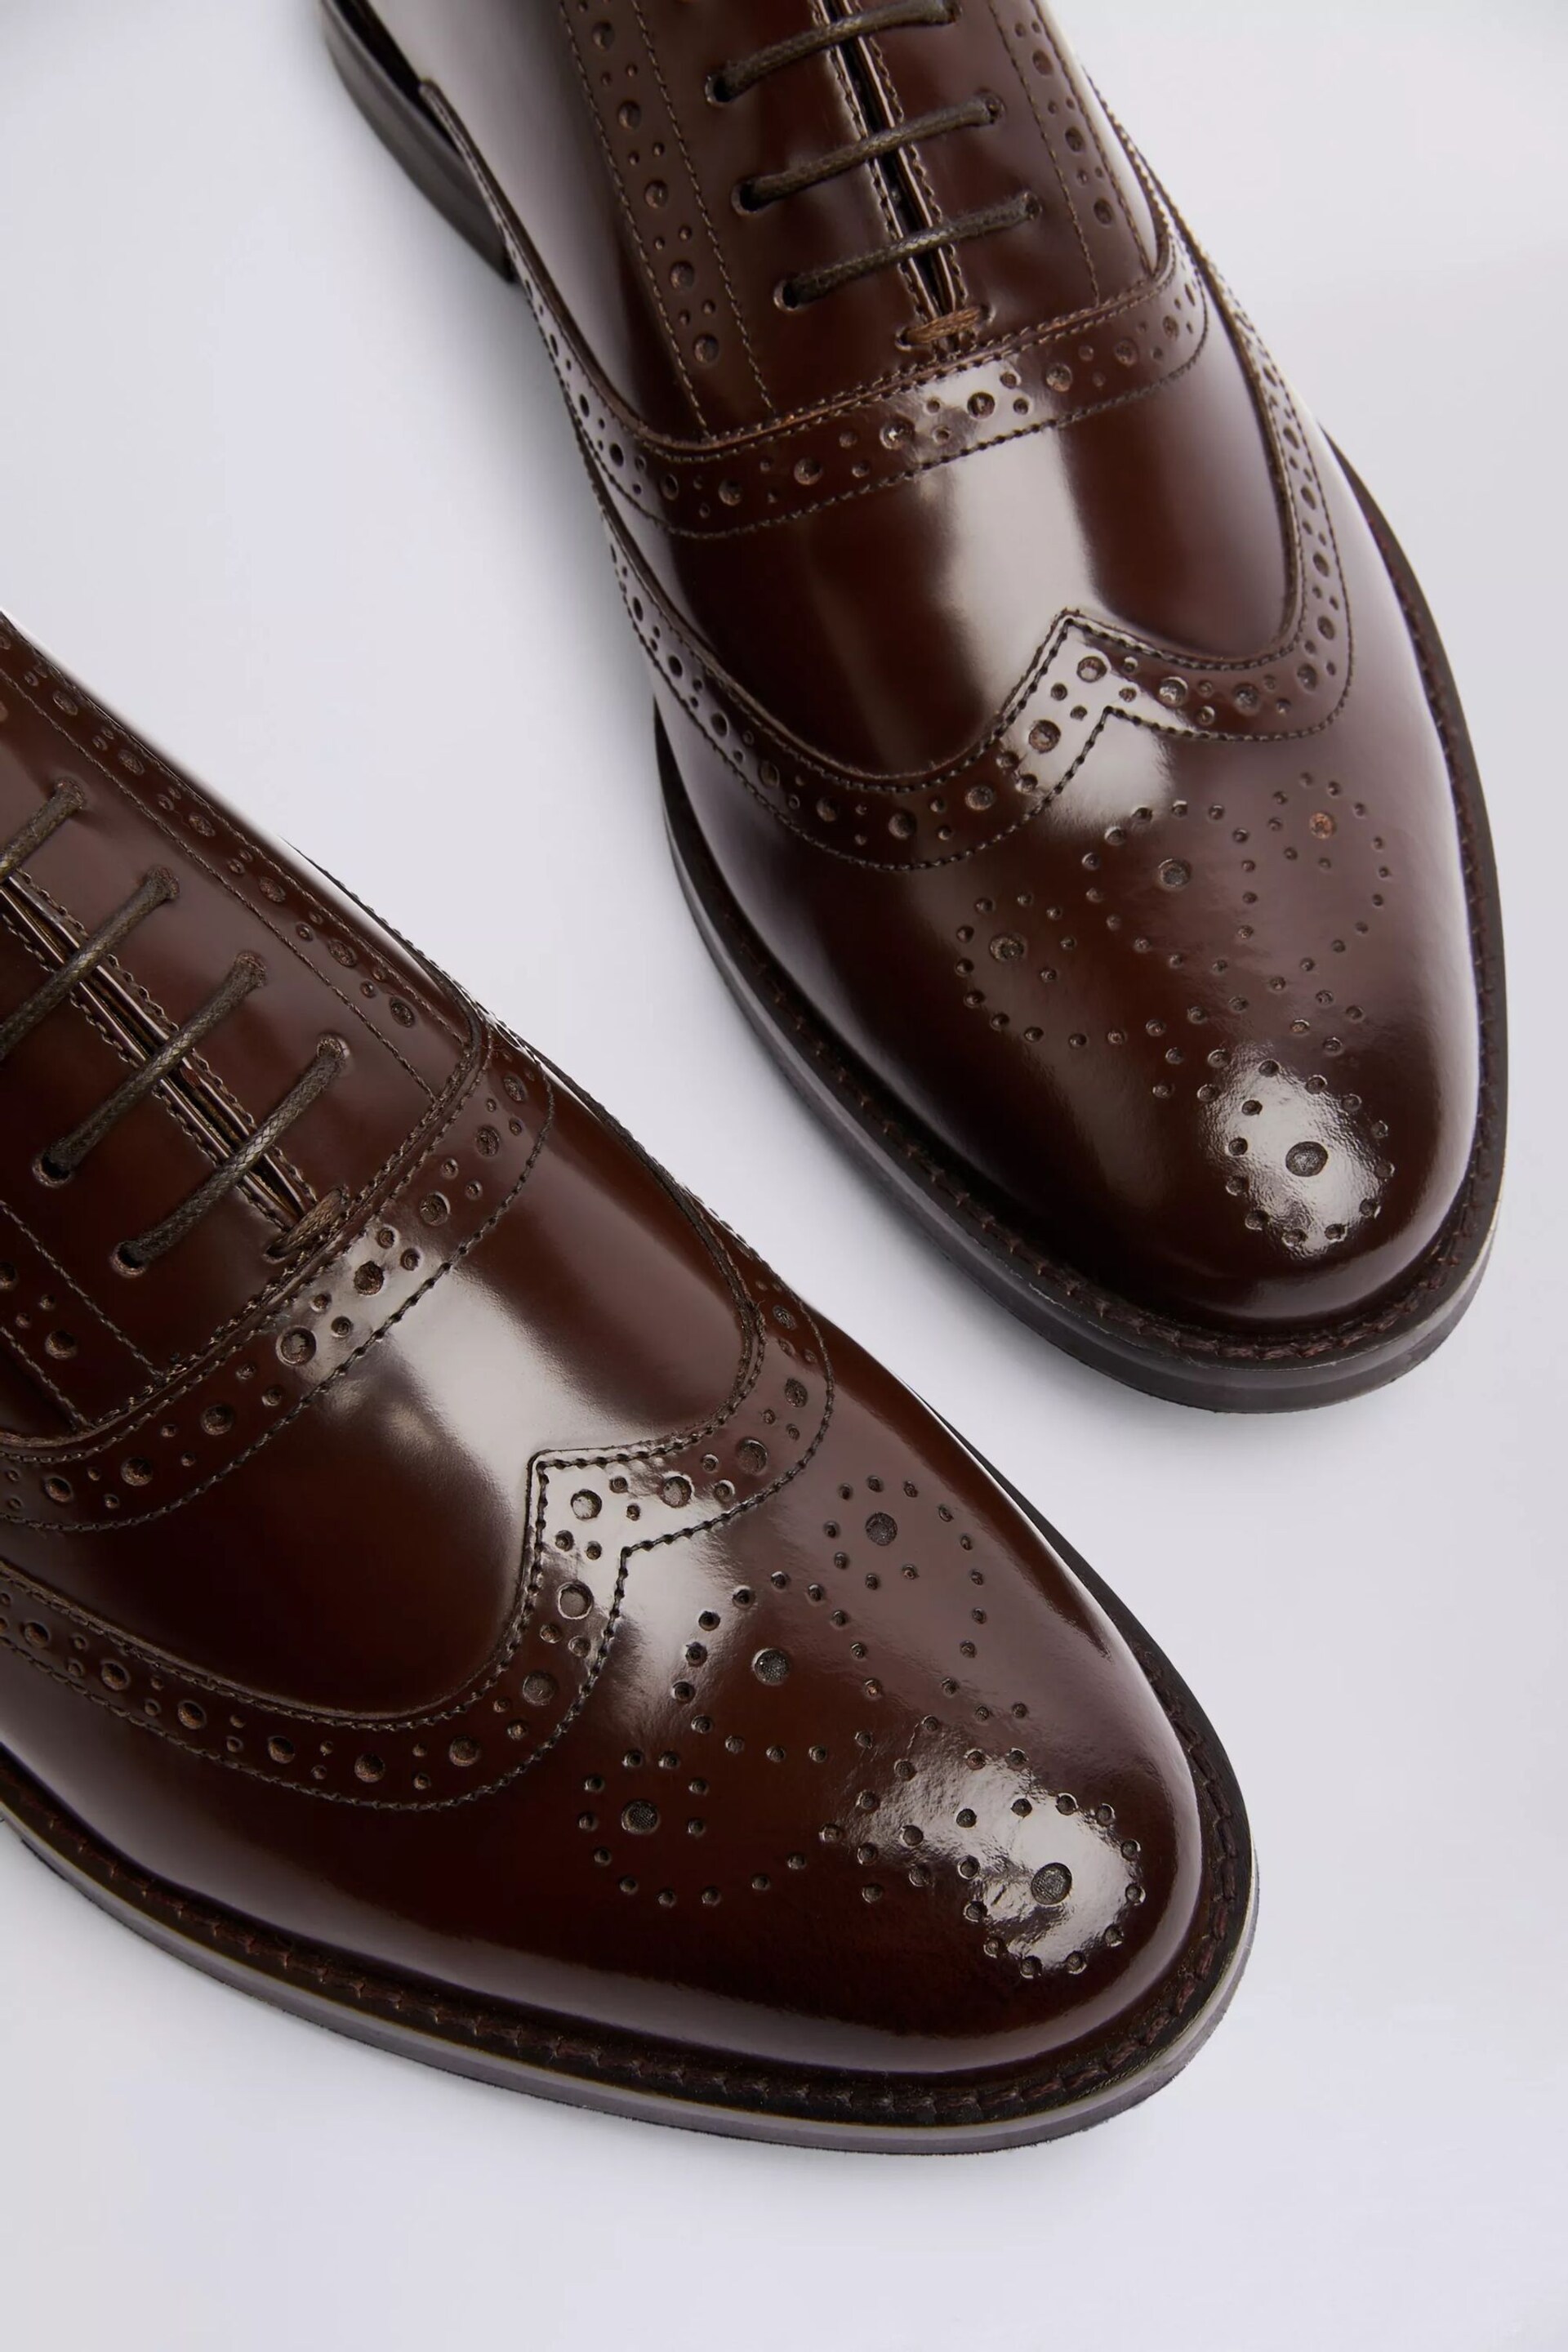 MOSS Brown Oxford Brogue Shoes - Image 4 of 4